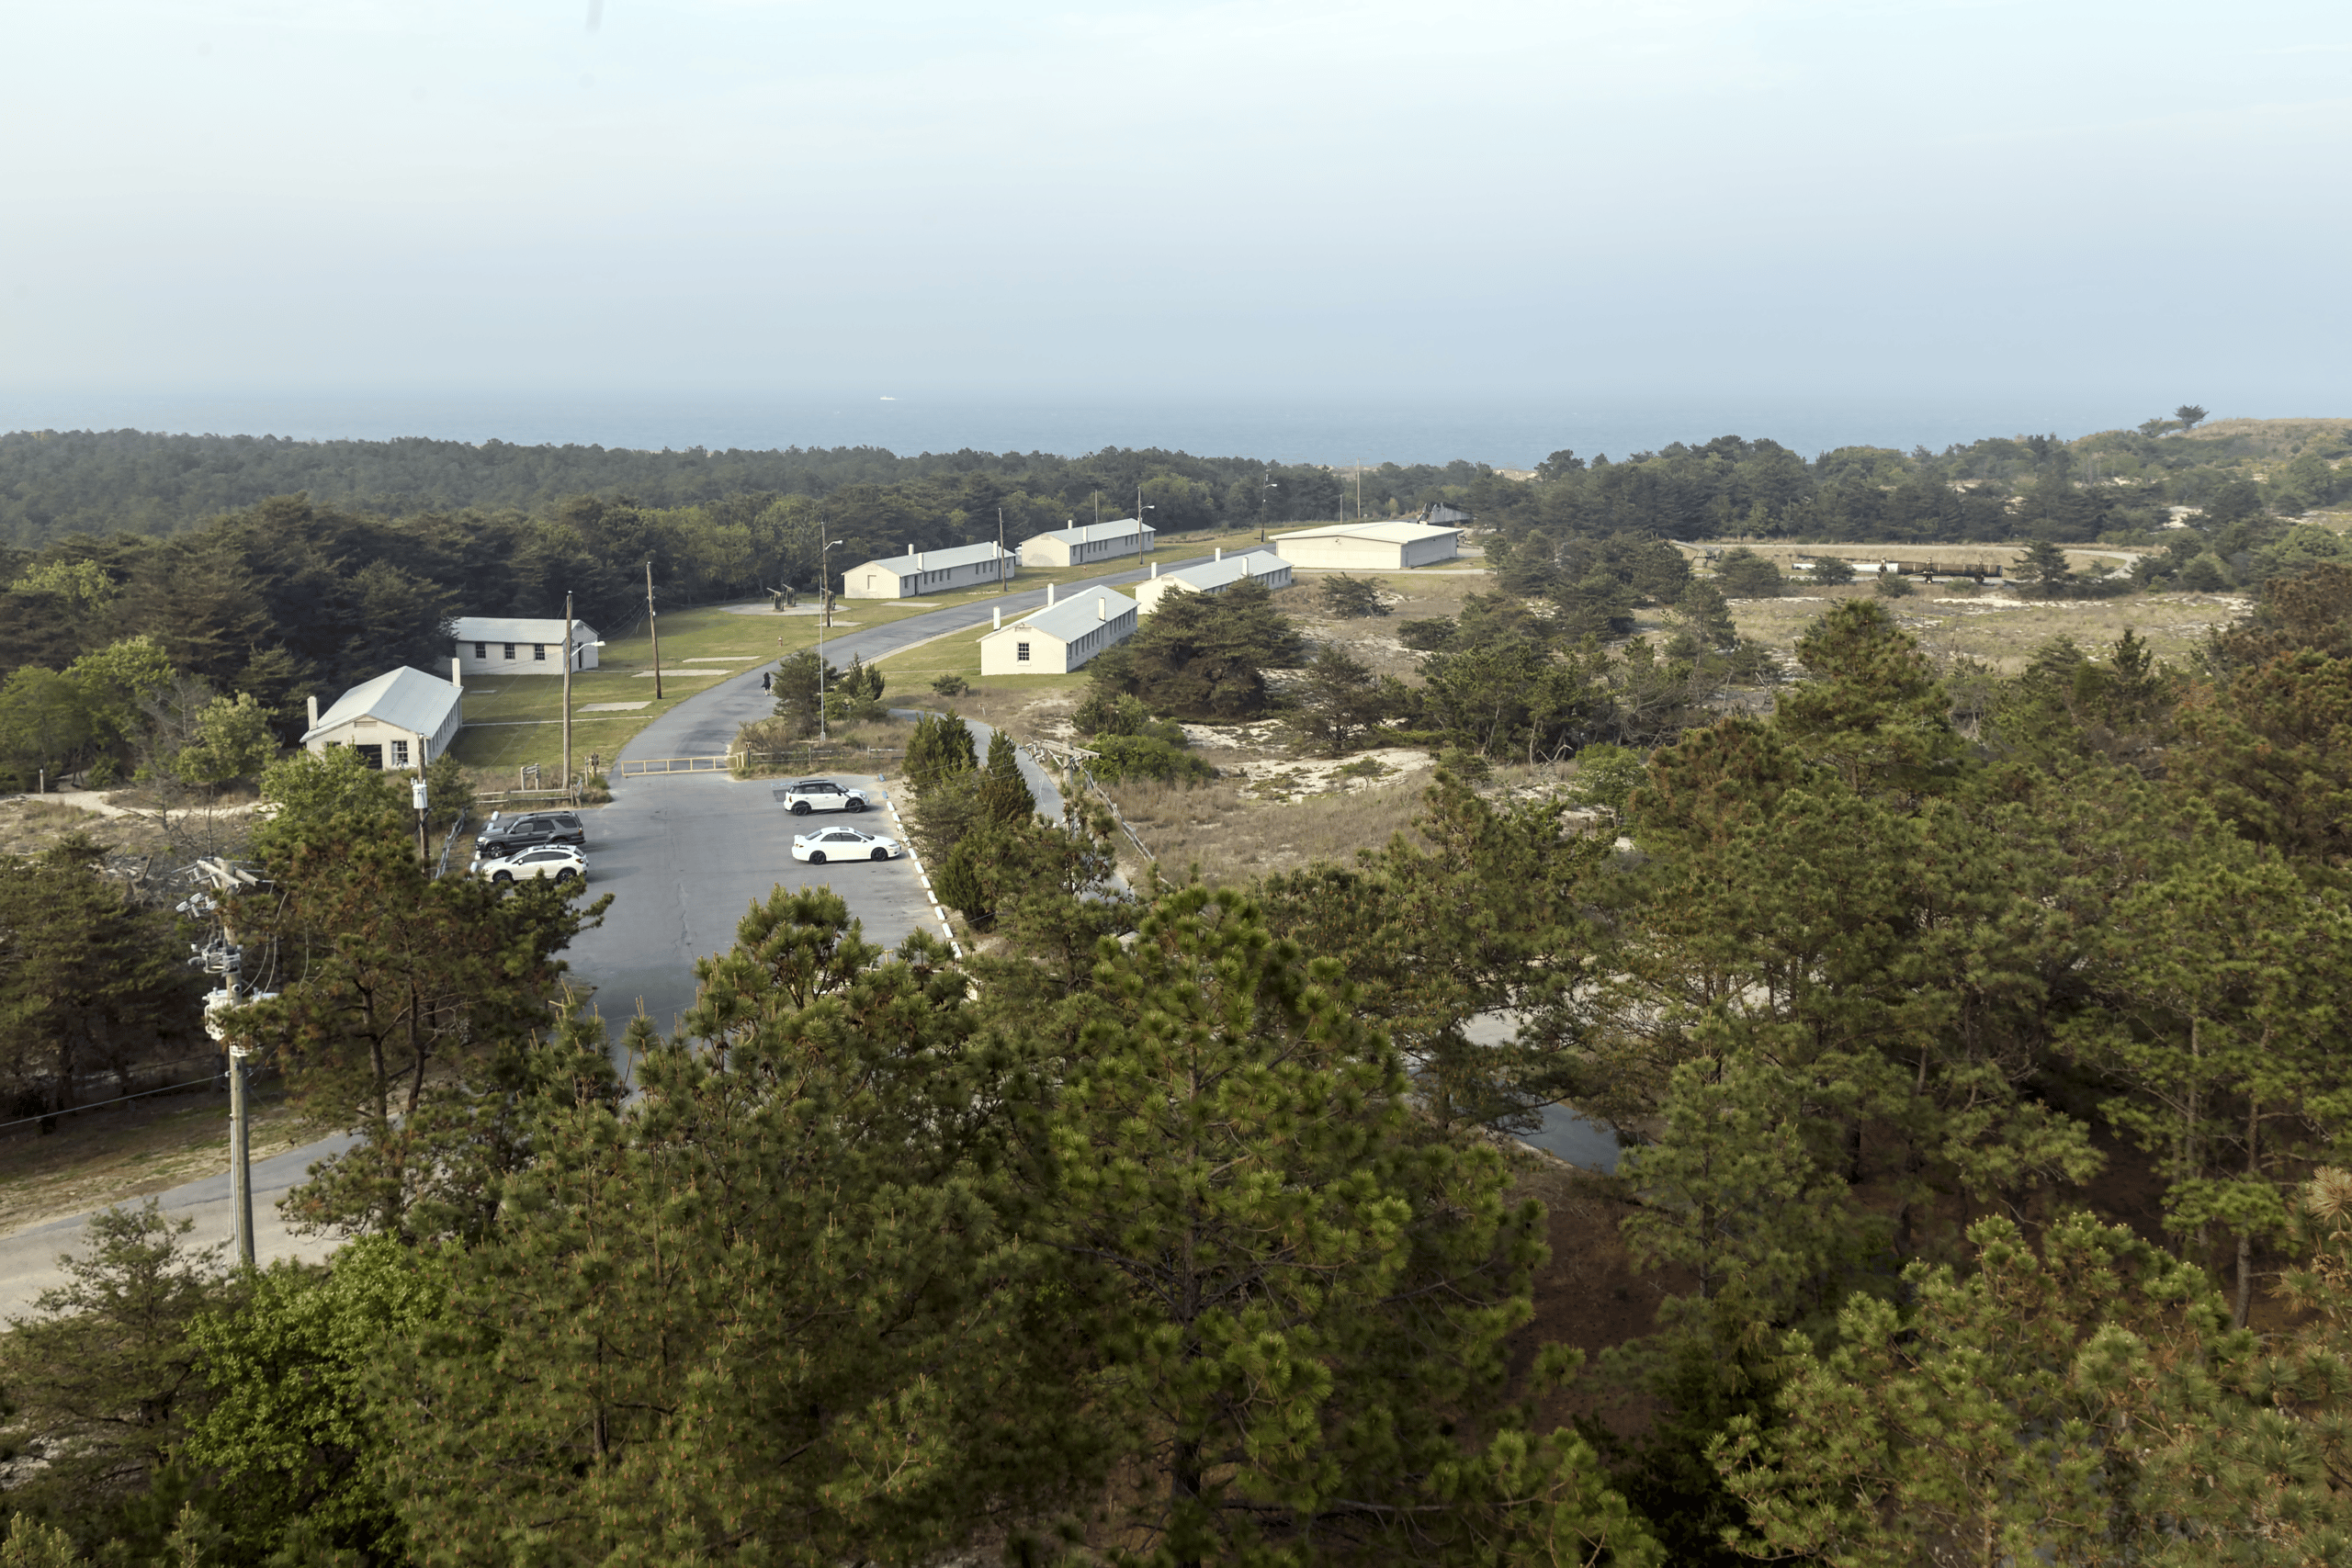 View of the Fort Miles barracks area from the top of an artillery spotting tower (Tower 7), looking towards the hazy Atlantic Ocean, Fort Miles, Delaware | Historic Sites In Delaware